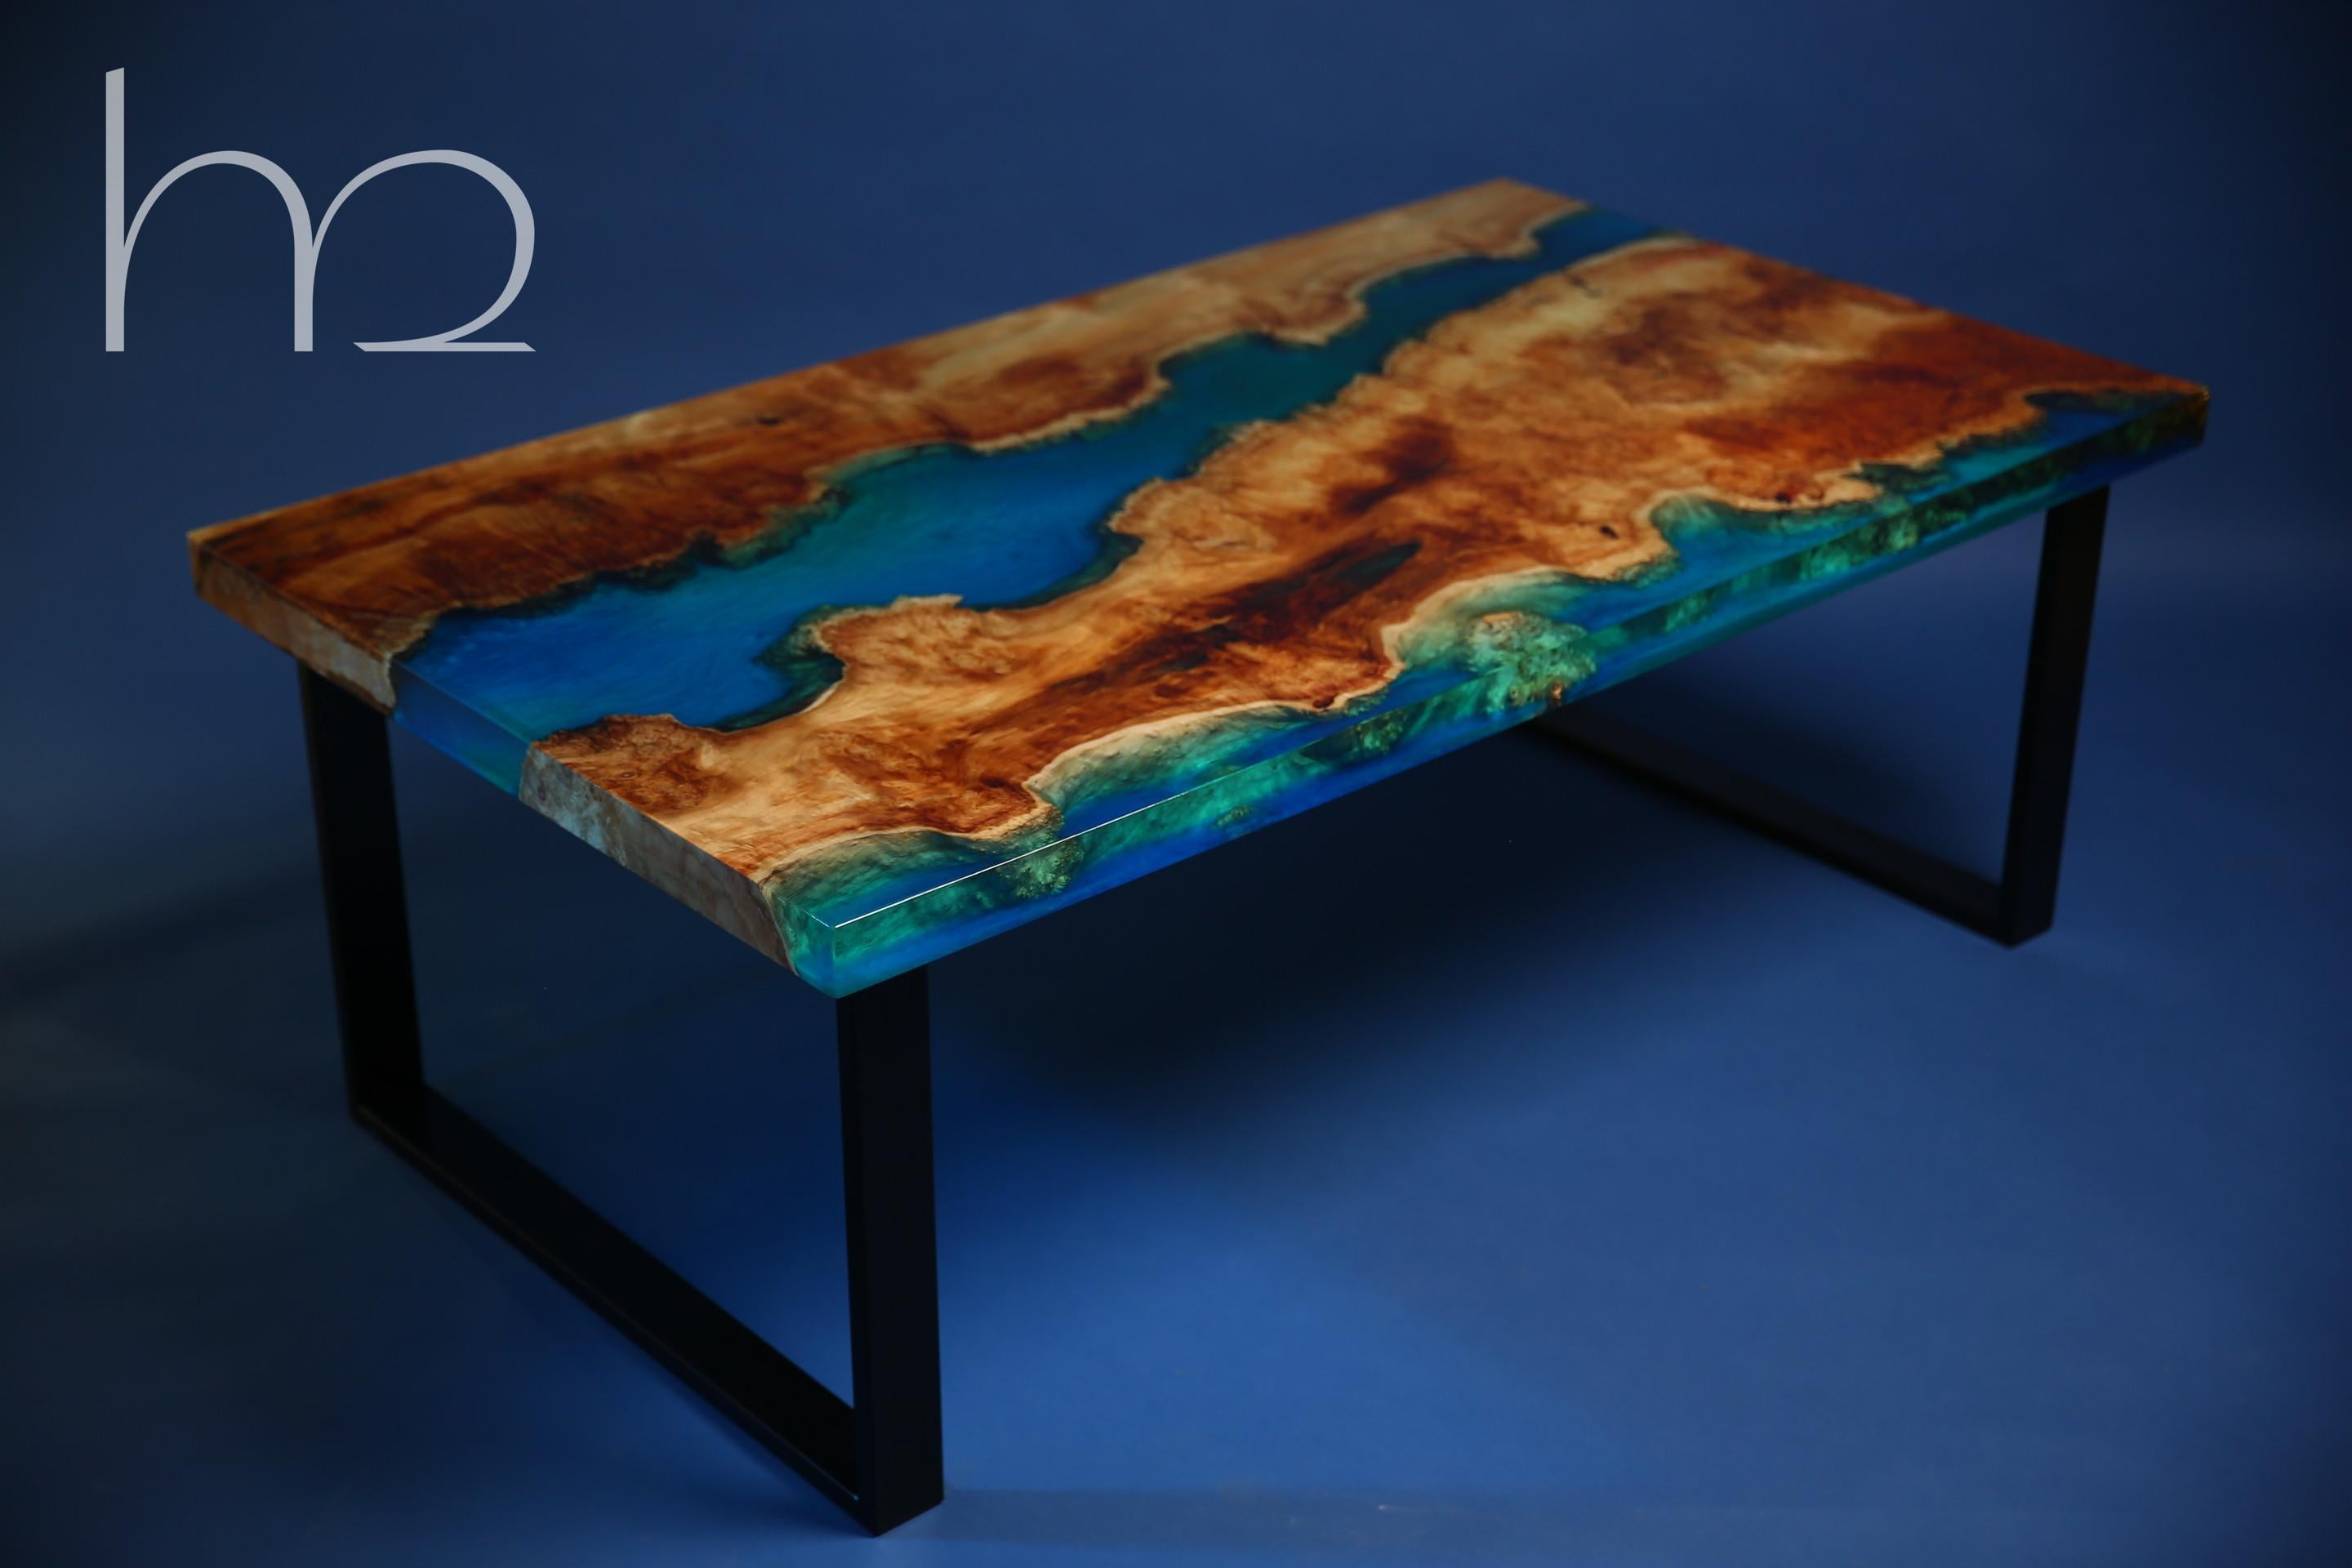 The trunk of an old burl maple washed by the waters of the Ionian Sea. Resin and lacquer finish for long lasting durability. 100% handcrafted. Made with passion.

Each table is made of selected slabs of different woods with character. We spend a